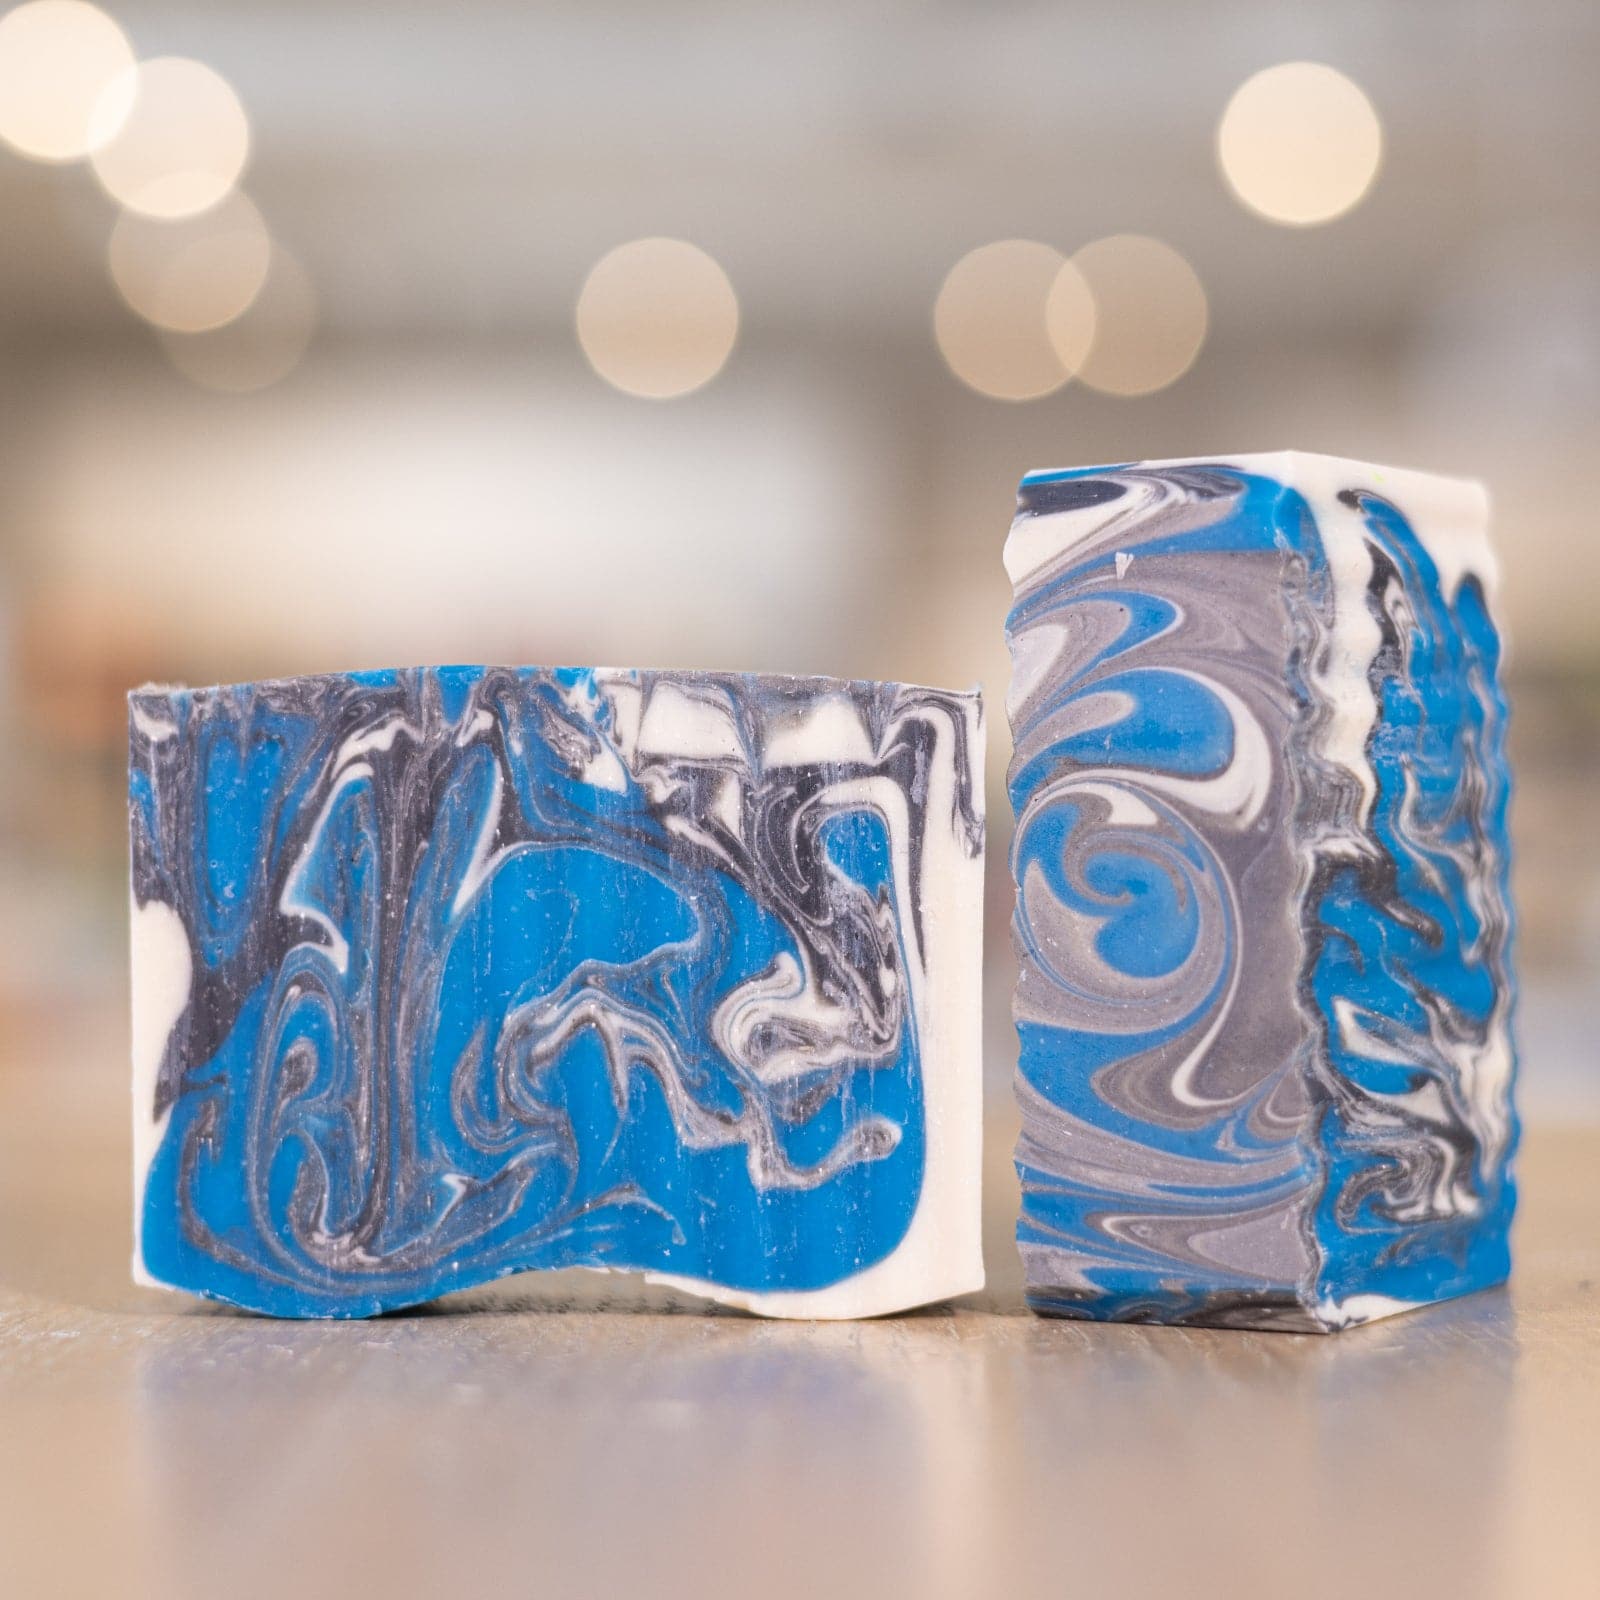 Two Hey Headache Soap Bars with blue and grey swirls on wooden counter